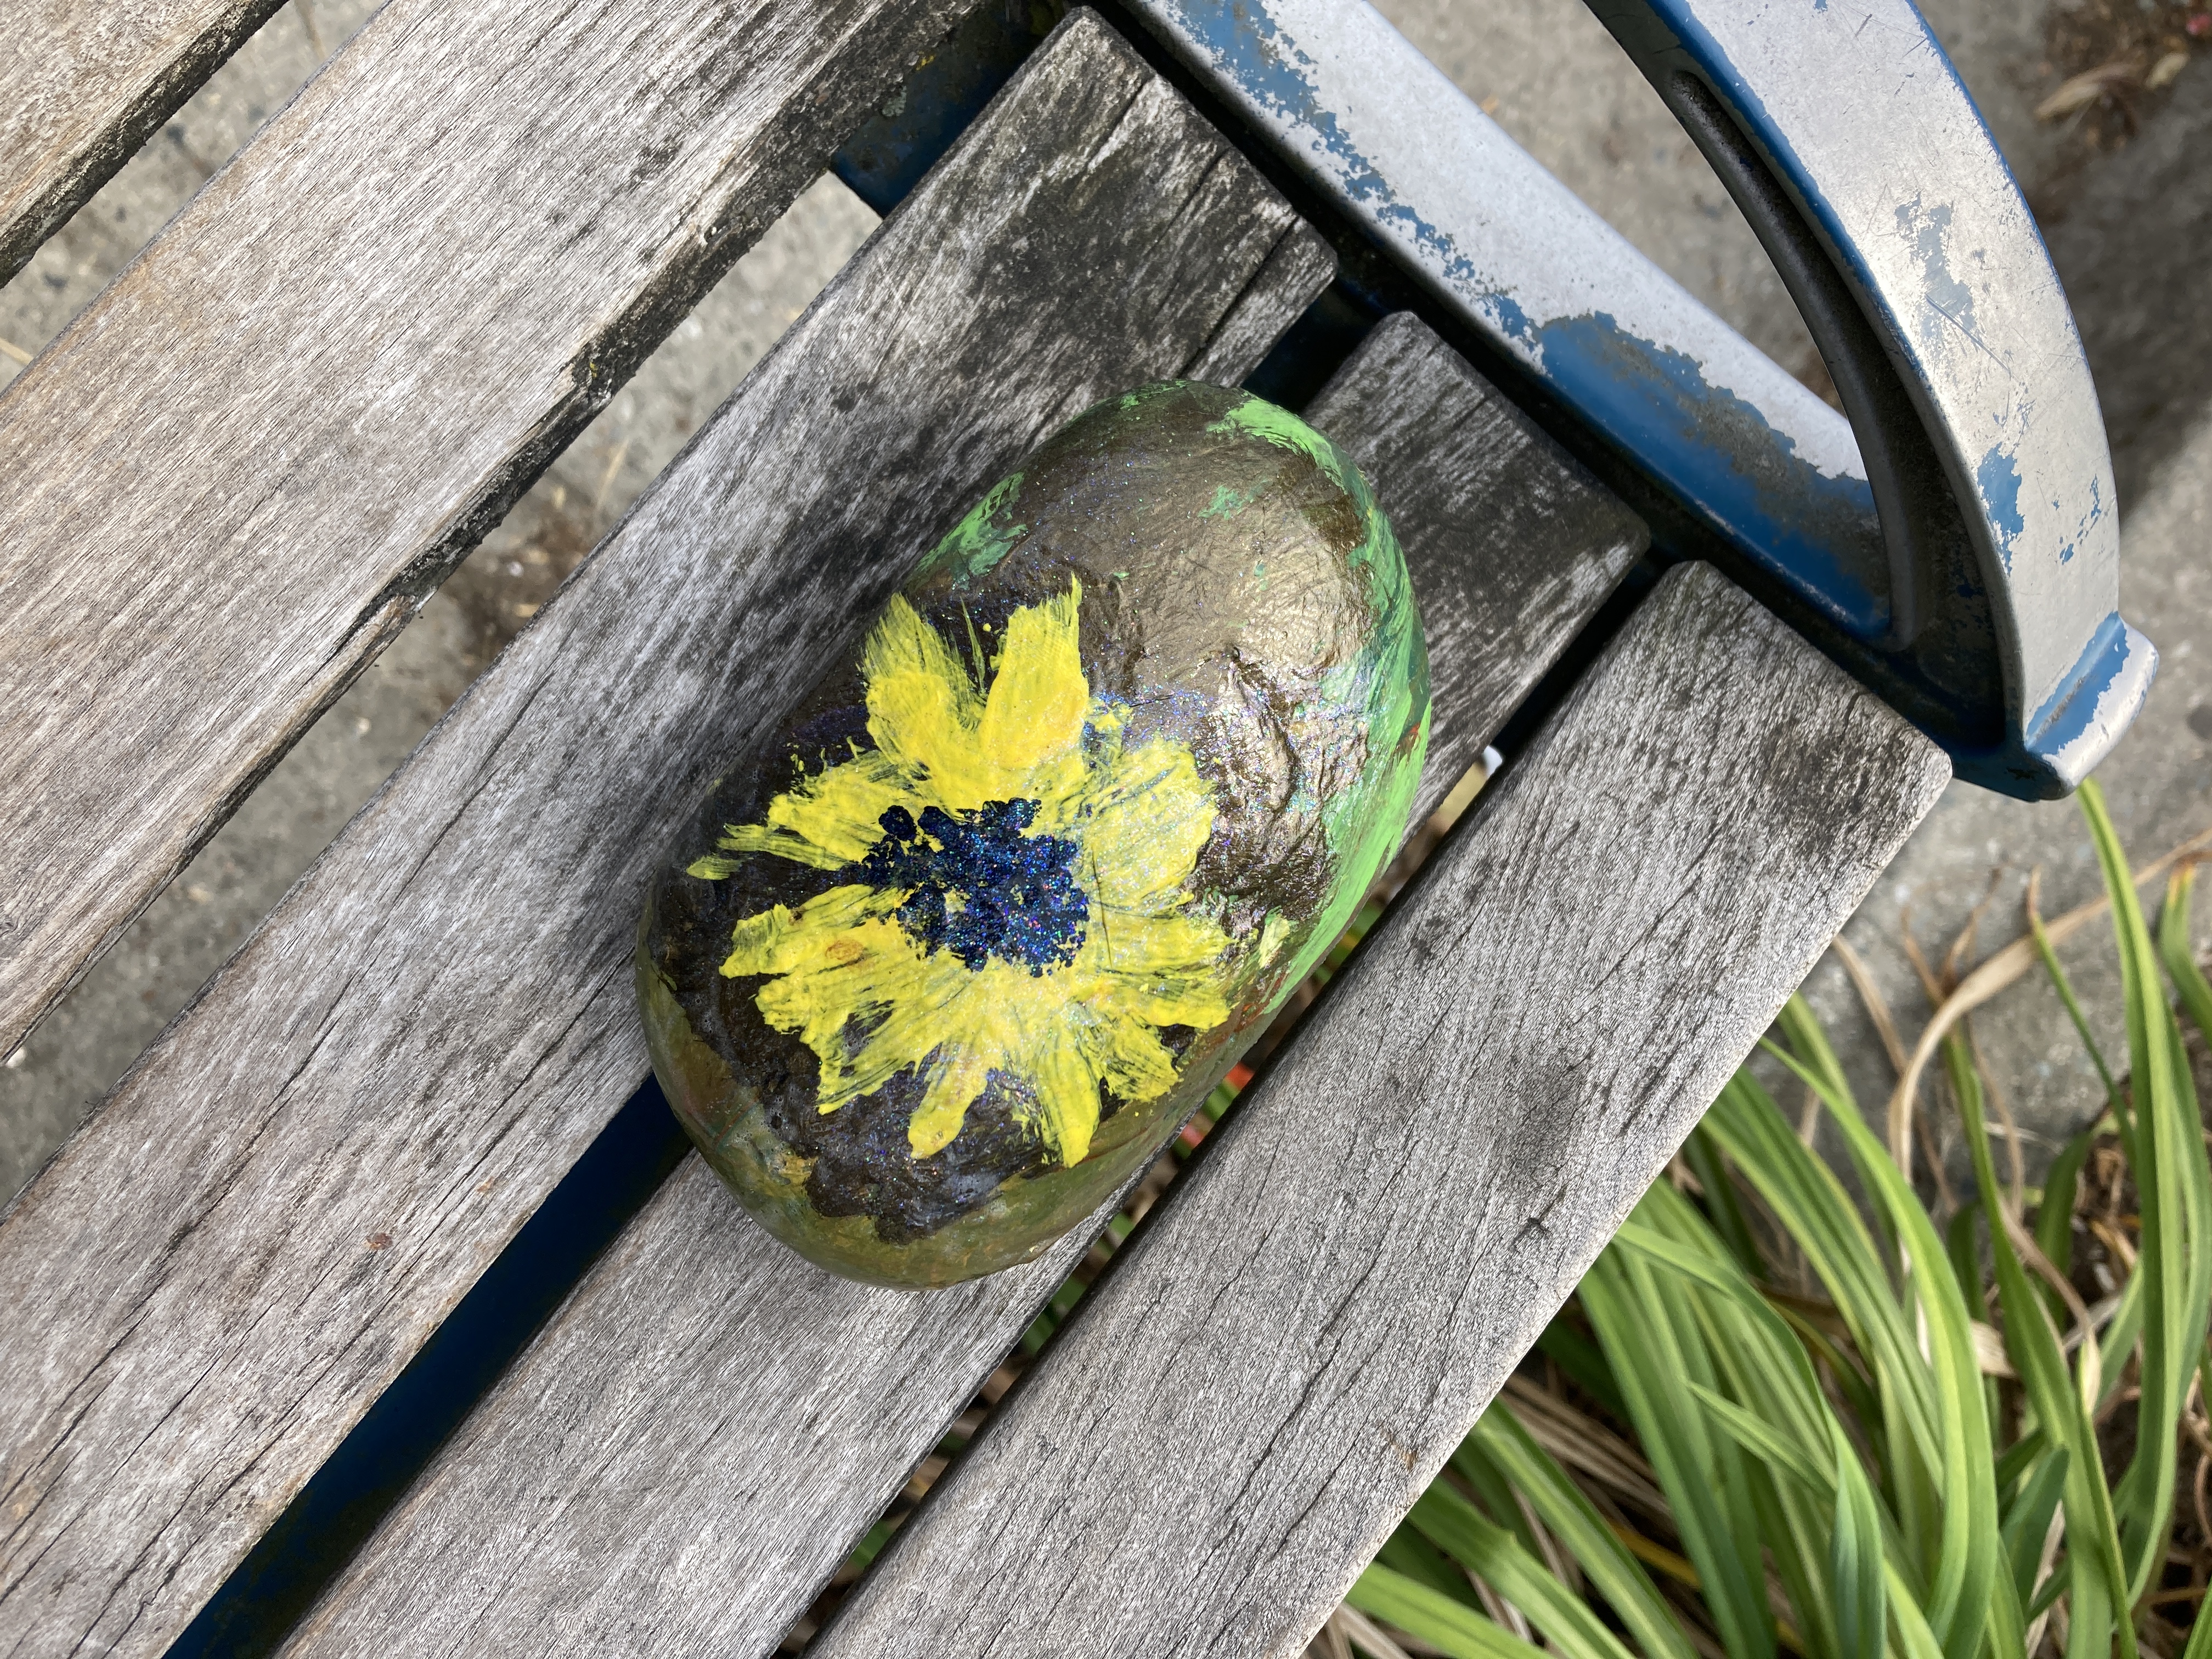 A handpainted rock, featuring a bright yellow sunflower with a dotted black and brown centre, sits on a bus bench in the sunshine.